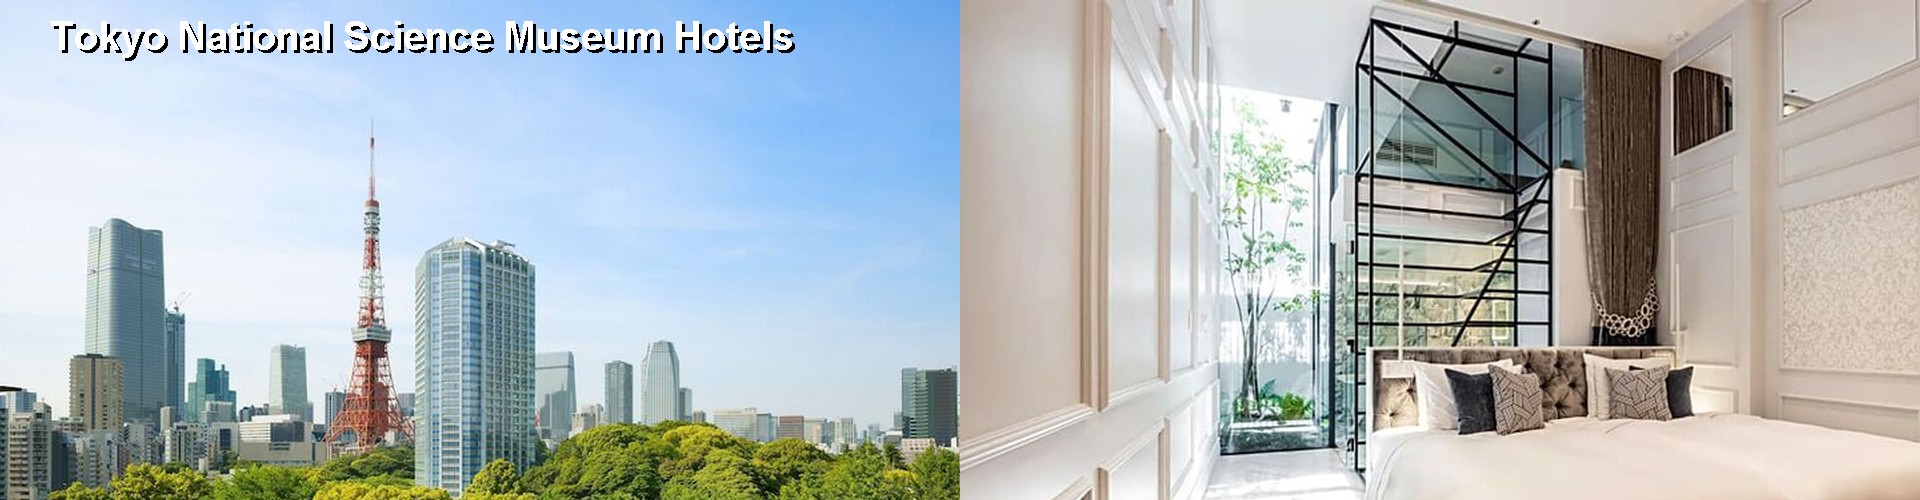 5 Best Hotels near Tokyo National Science Museum